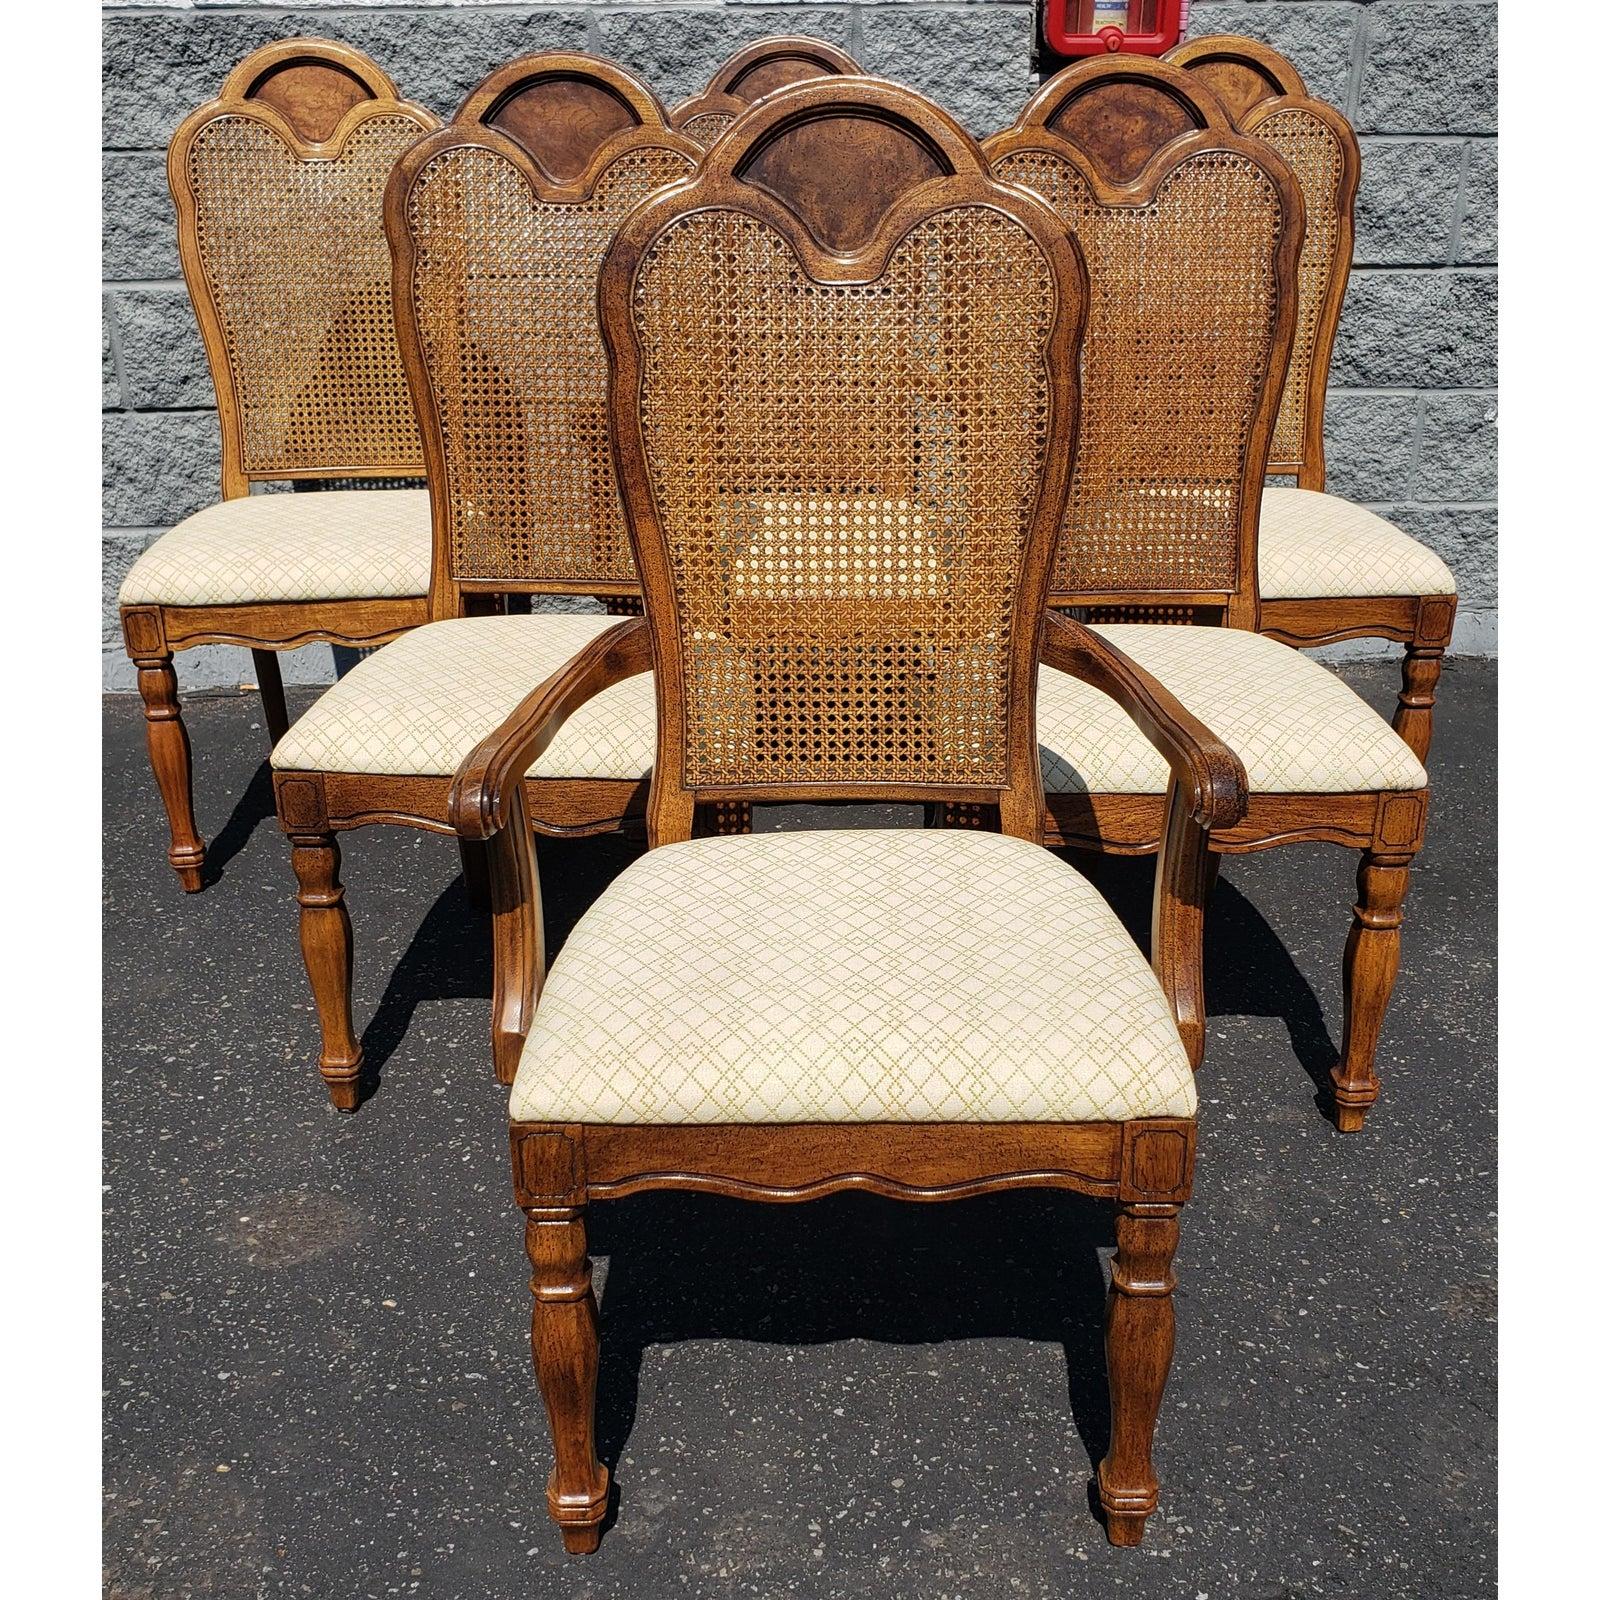 French Country Thomasville Walnut Cane Back Dining Room Chairs, Set of 6 3